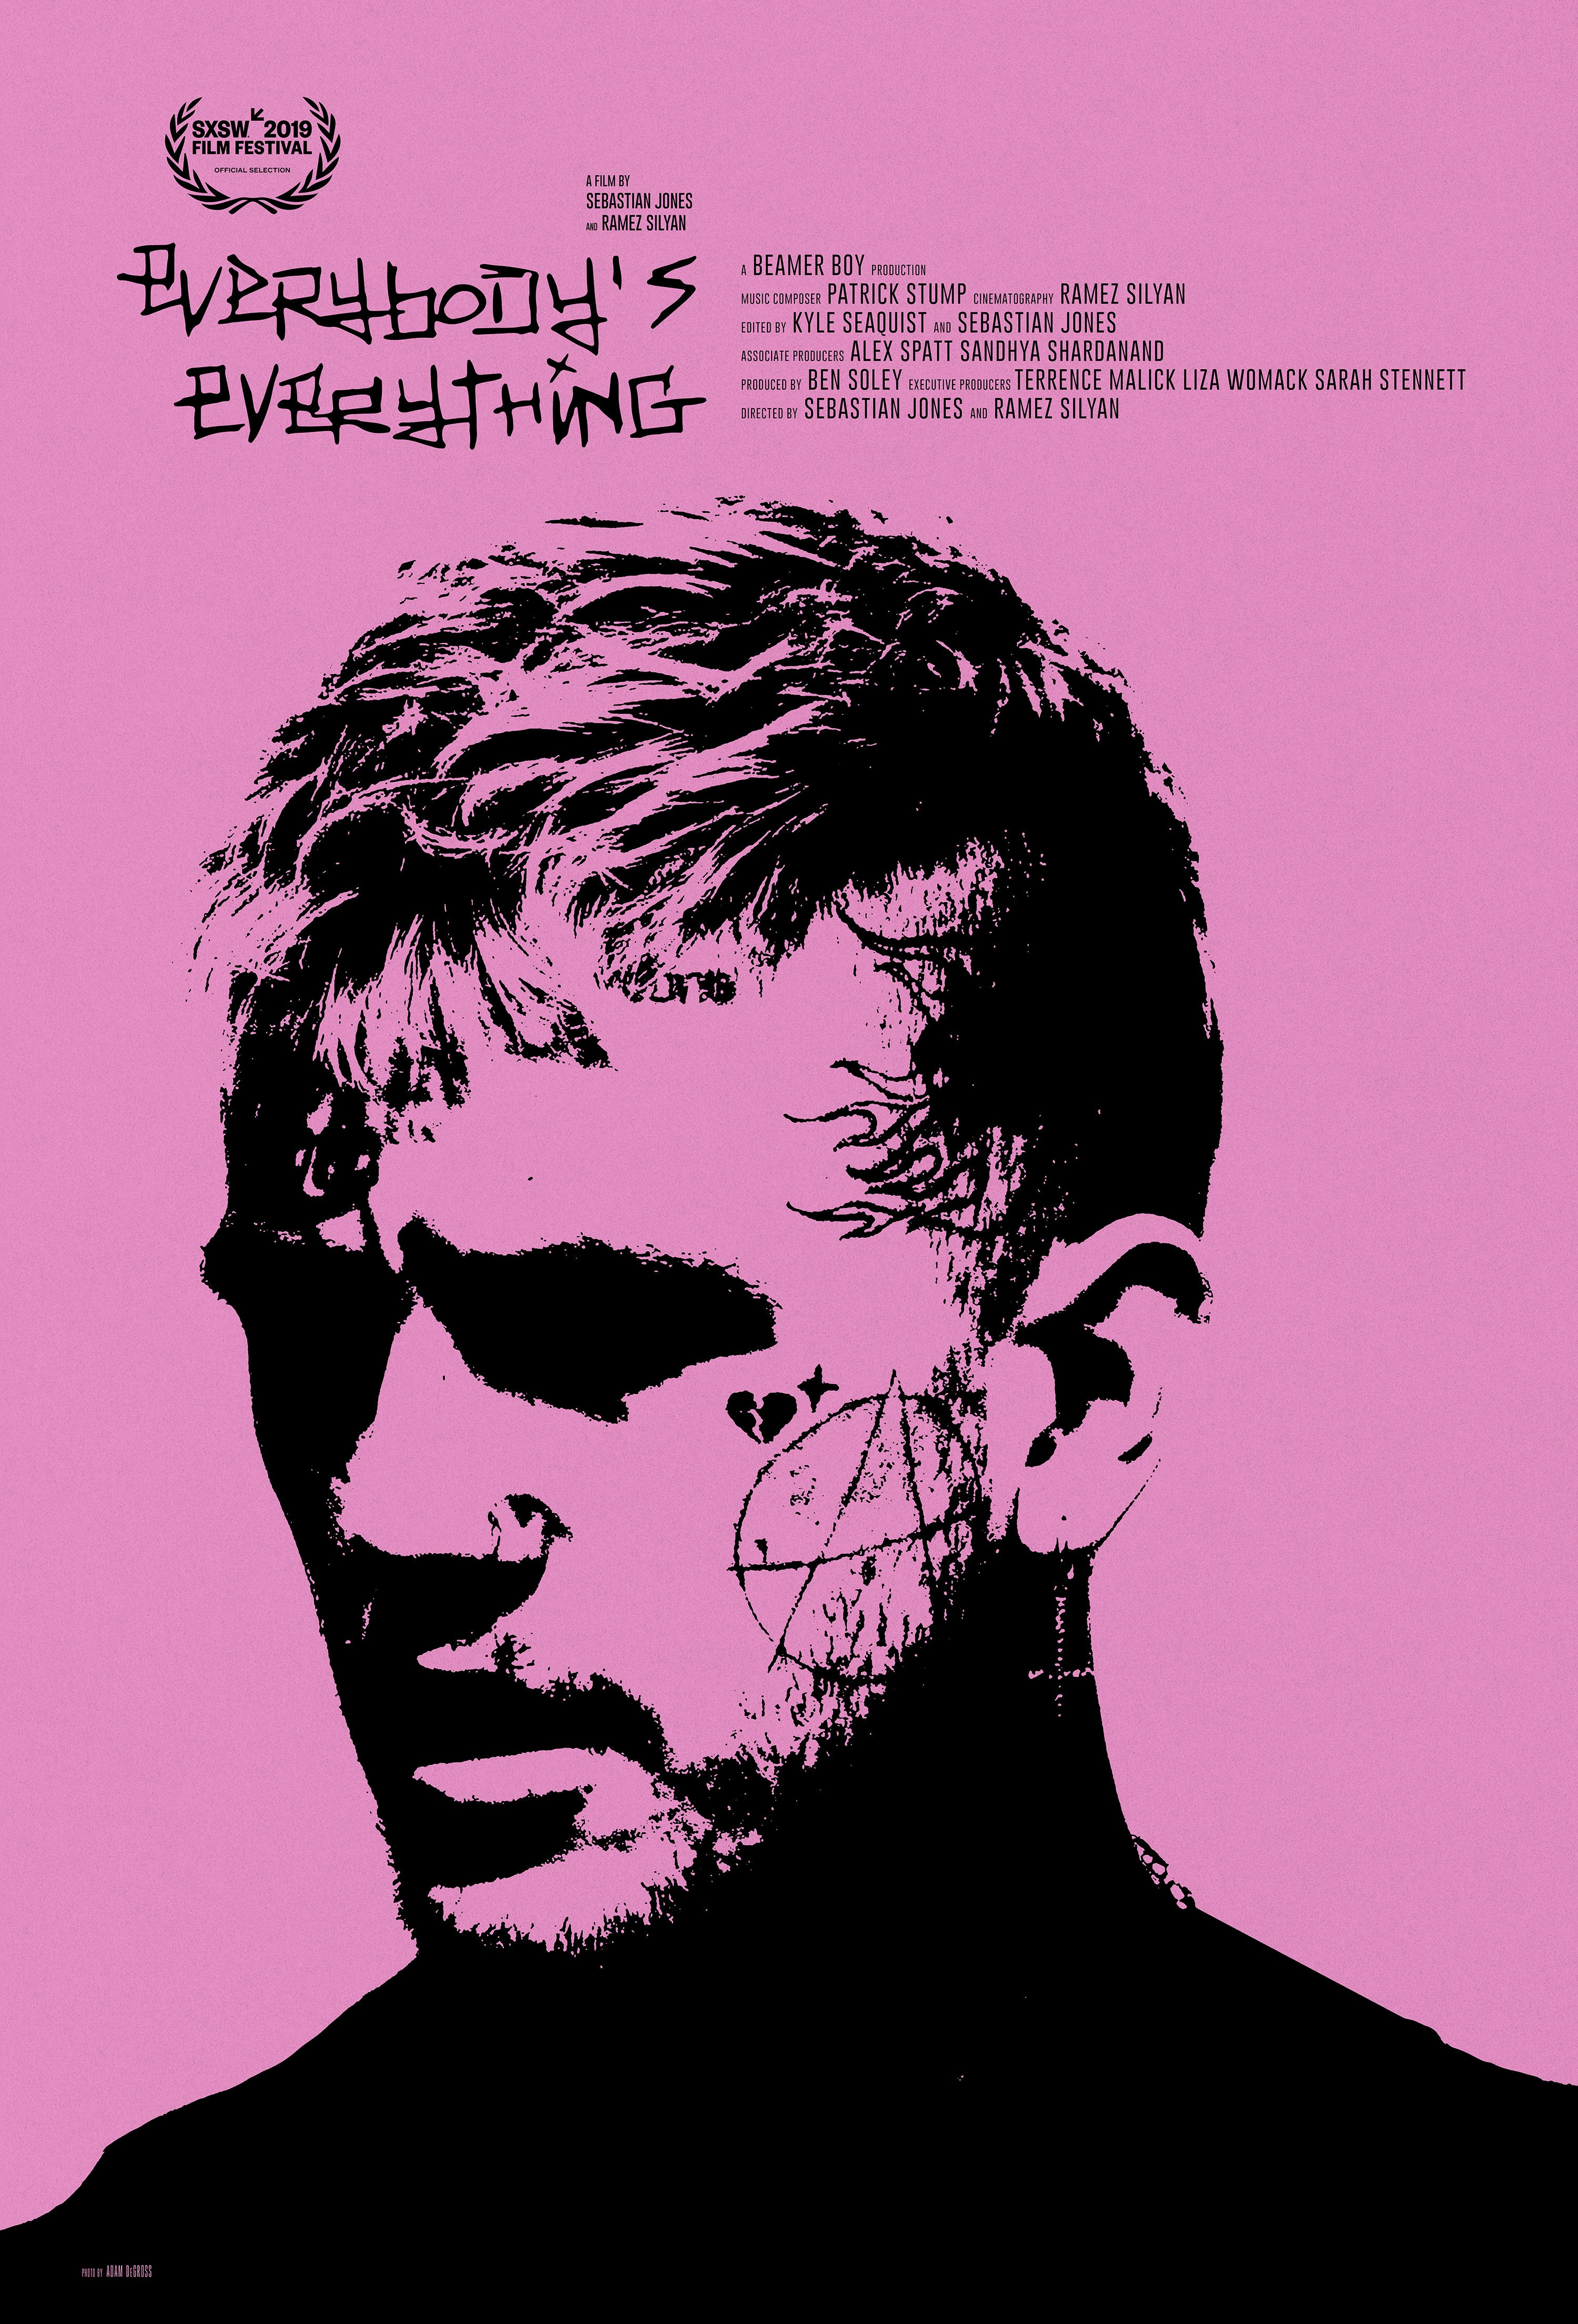 the poster for Everybody's Everything, showing Lil Peep's face on a pink background